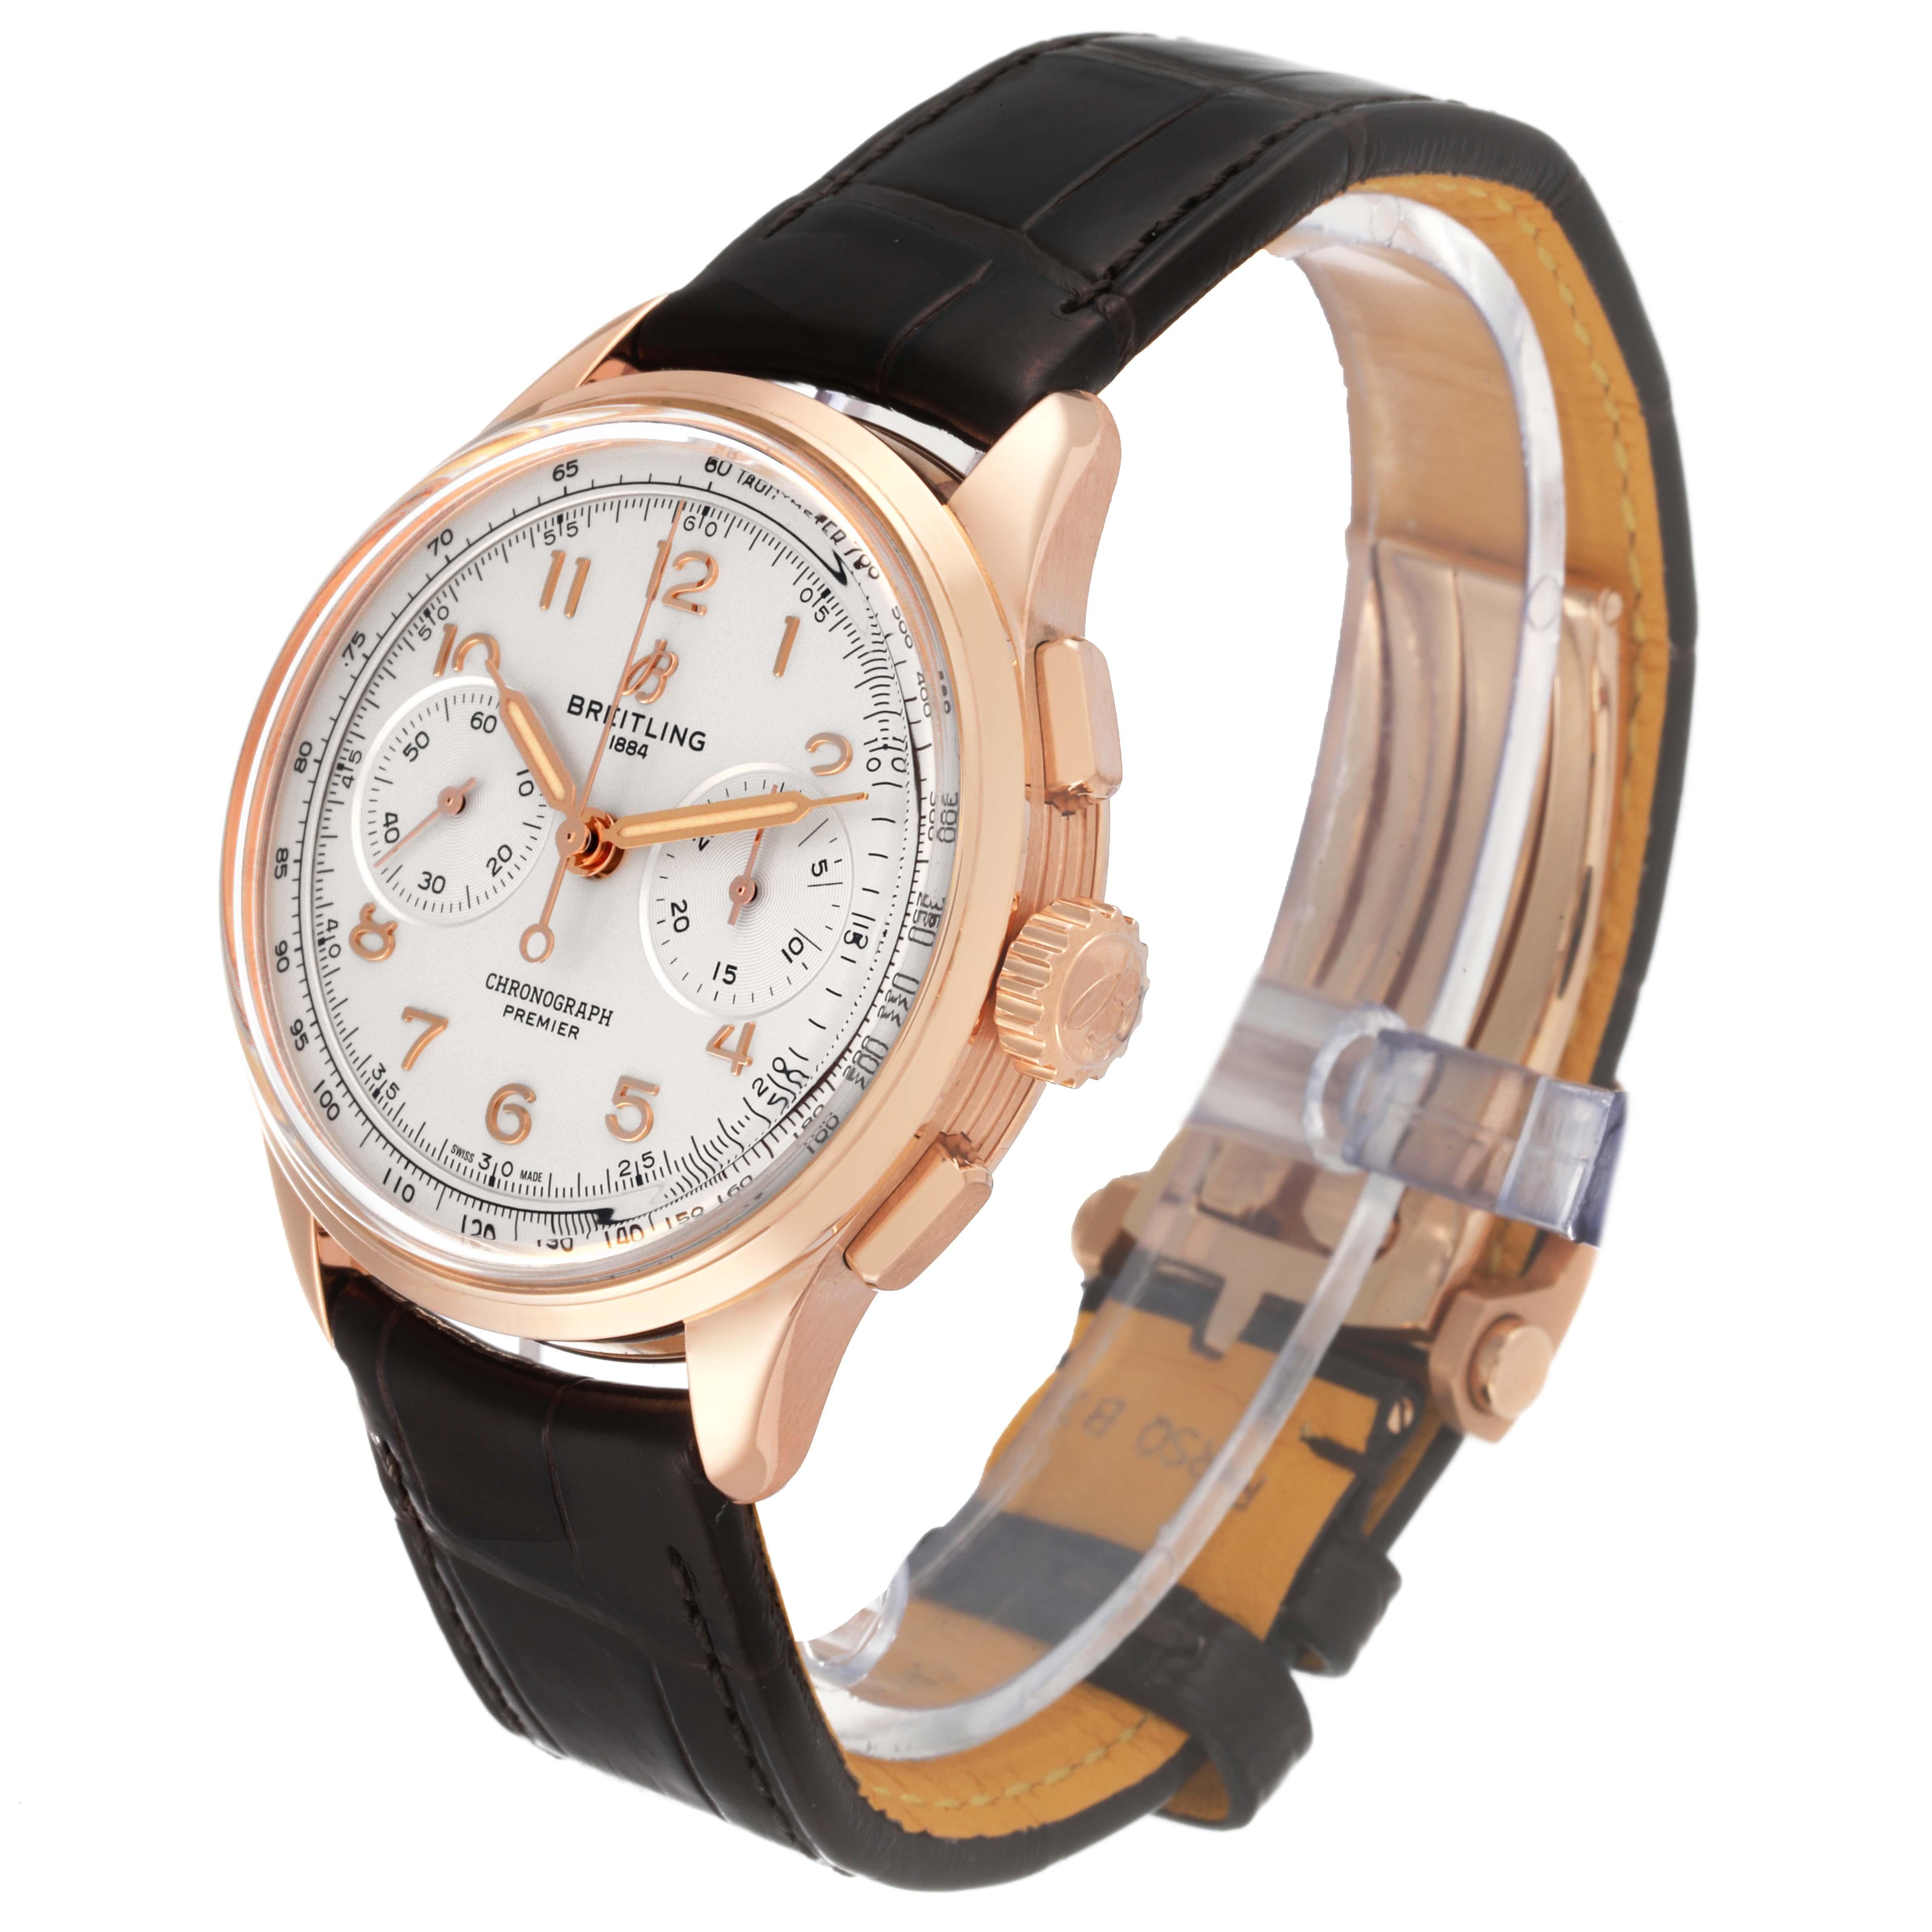 Breitling Premier B09 Chronograph 40 Rose Gold Mens Watch RB0930 Box Card In Excellent Condition For Sale In Atlanta, GA